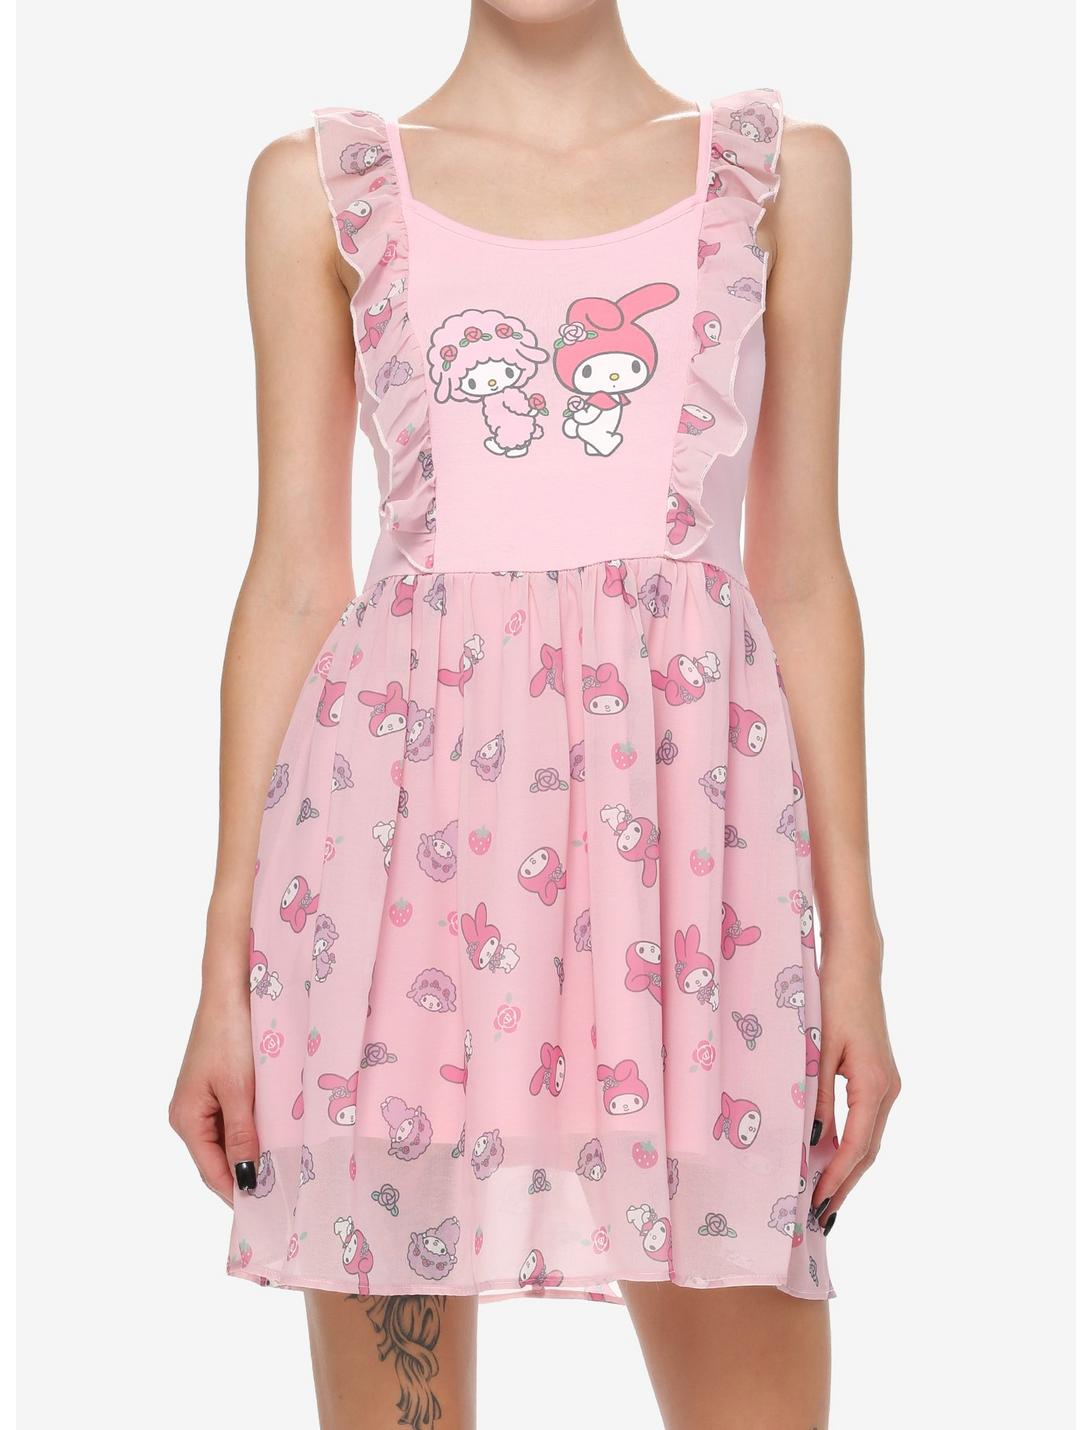 My Melody & My Sweet Piano Flutter Dress, MULTI, hi-res